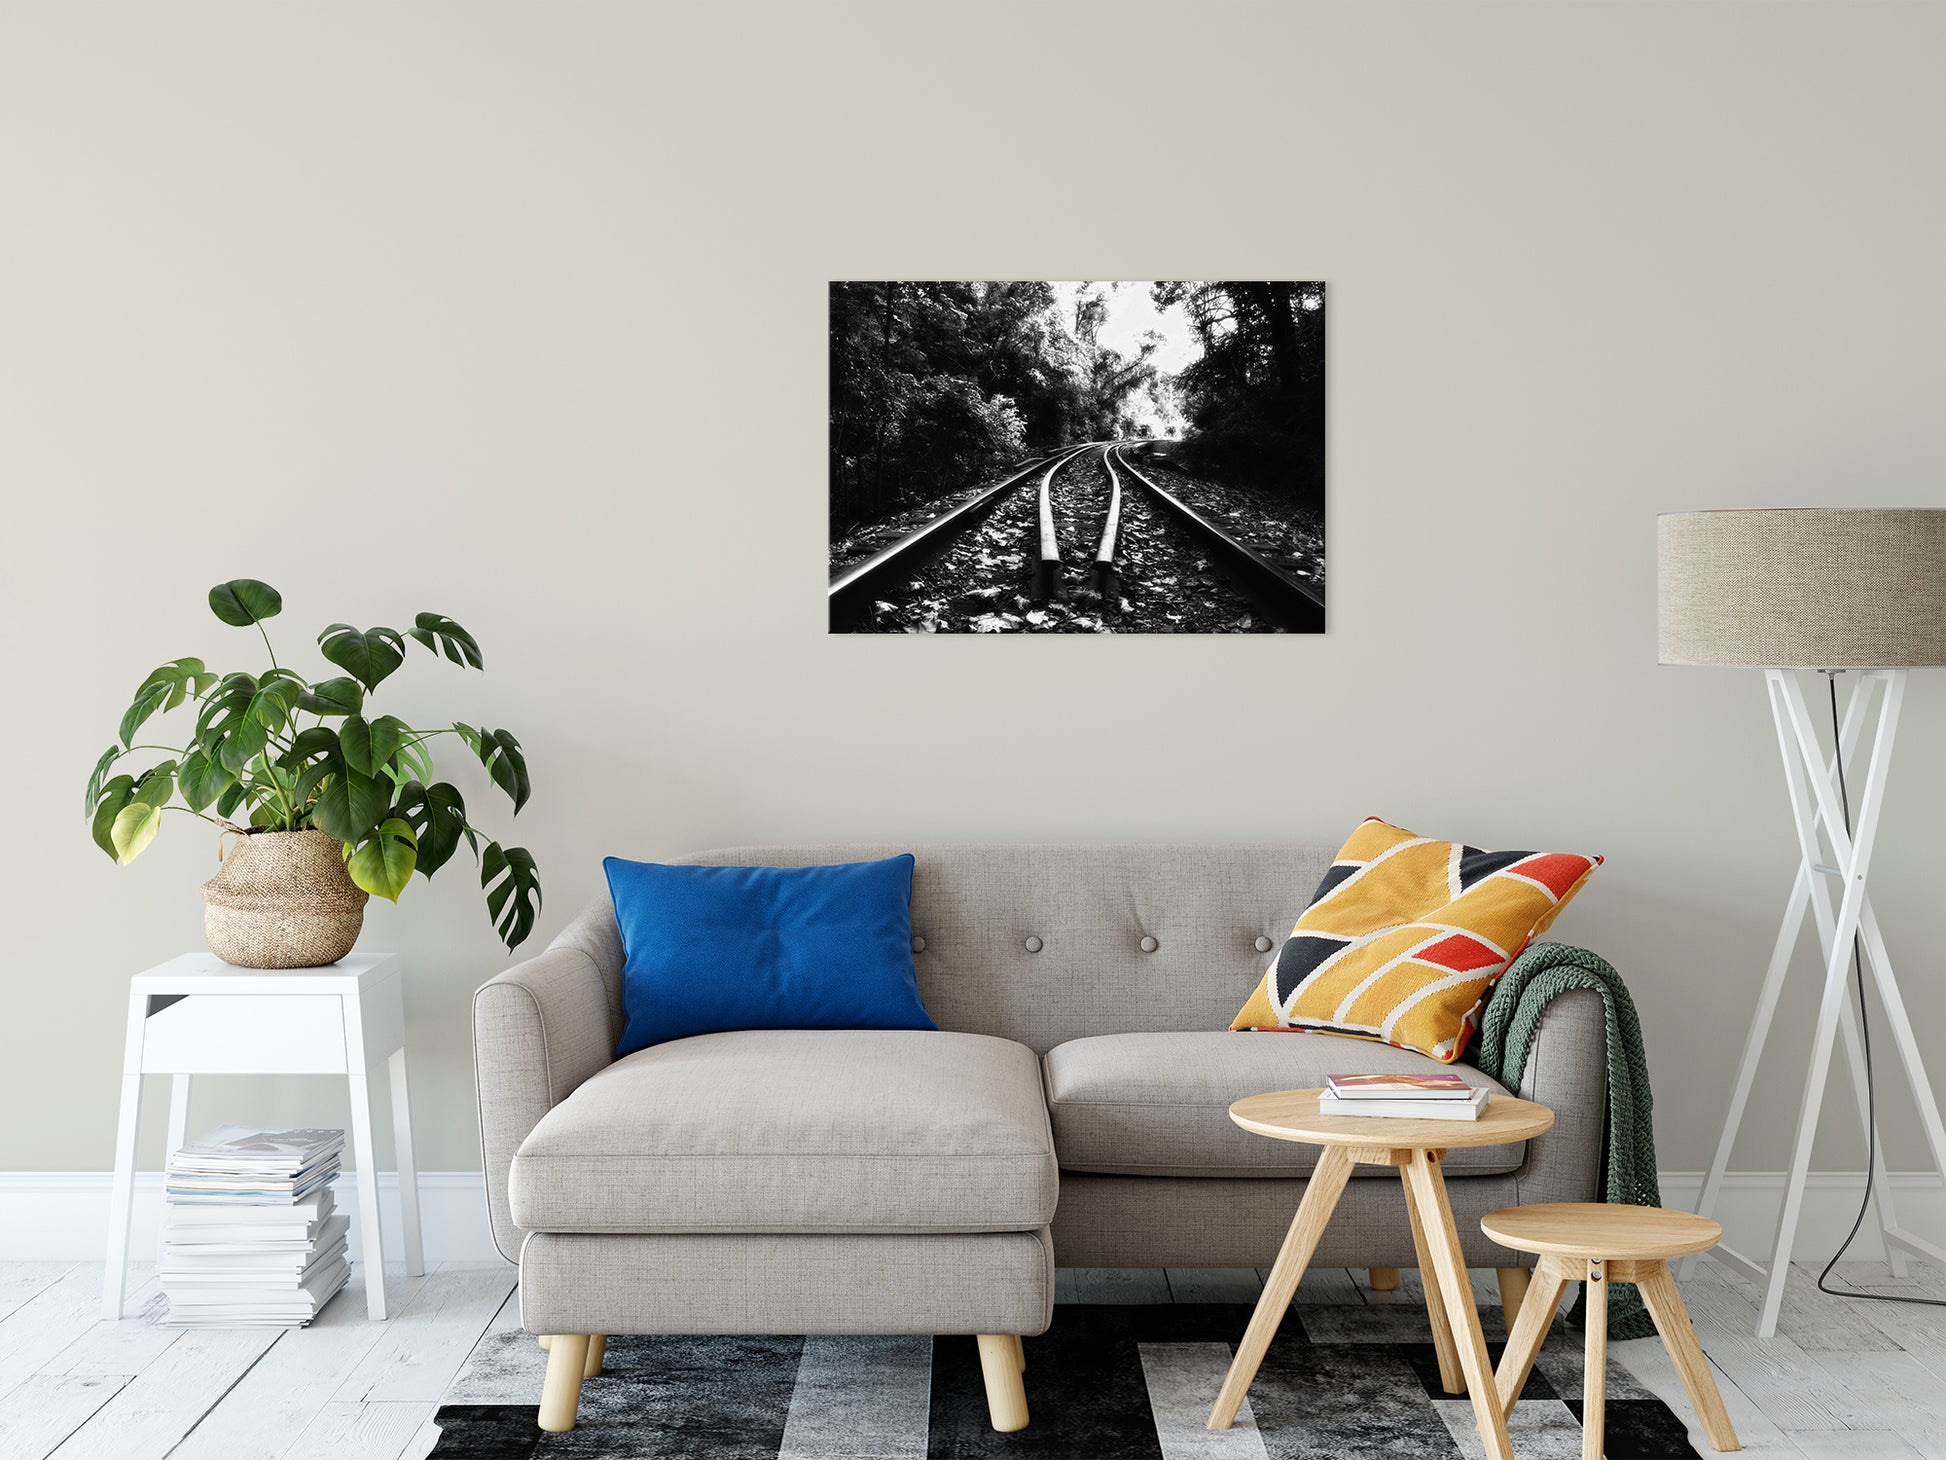 Lead Me Into The Light in Black and White Rural Landscape Fine Art Canvas Wall Art Prints 24" x 36" - PIPAFINEART